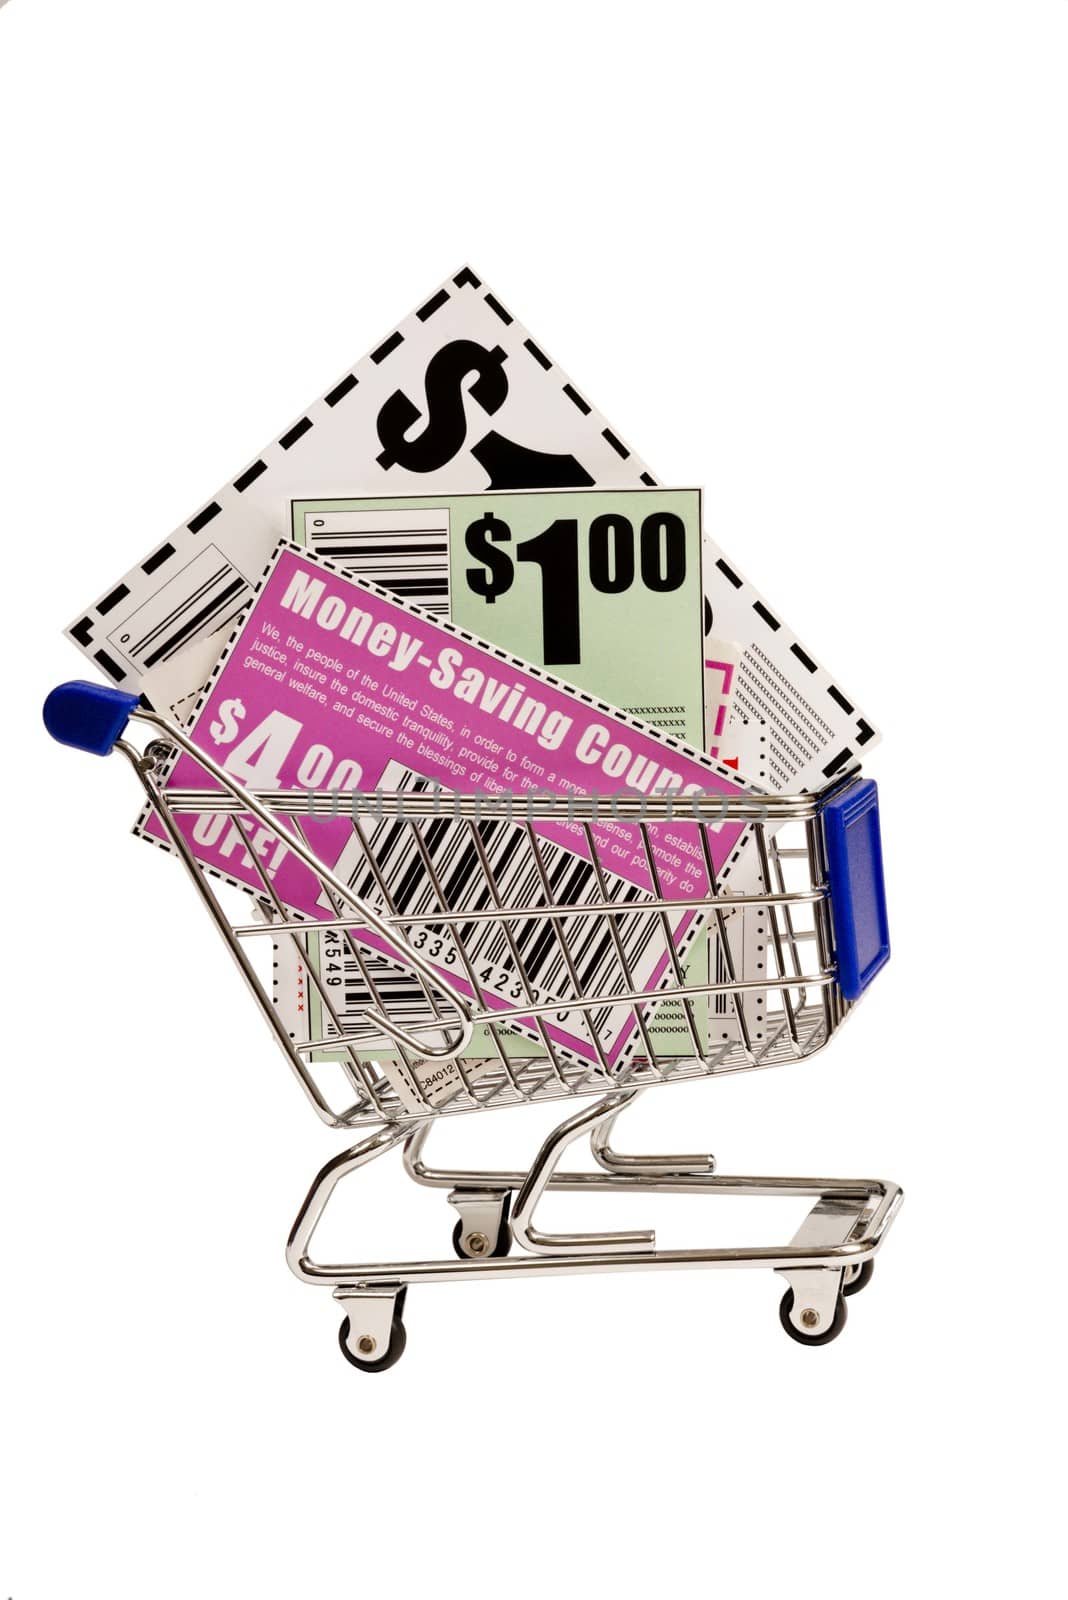 Coupons And Shopping Cart Isolated by stockbuster1